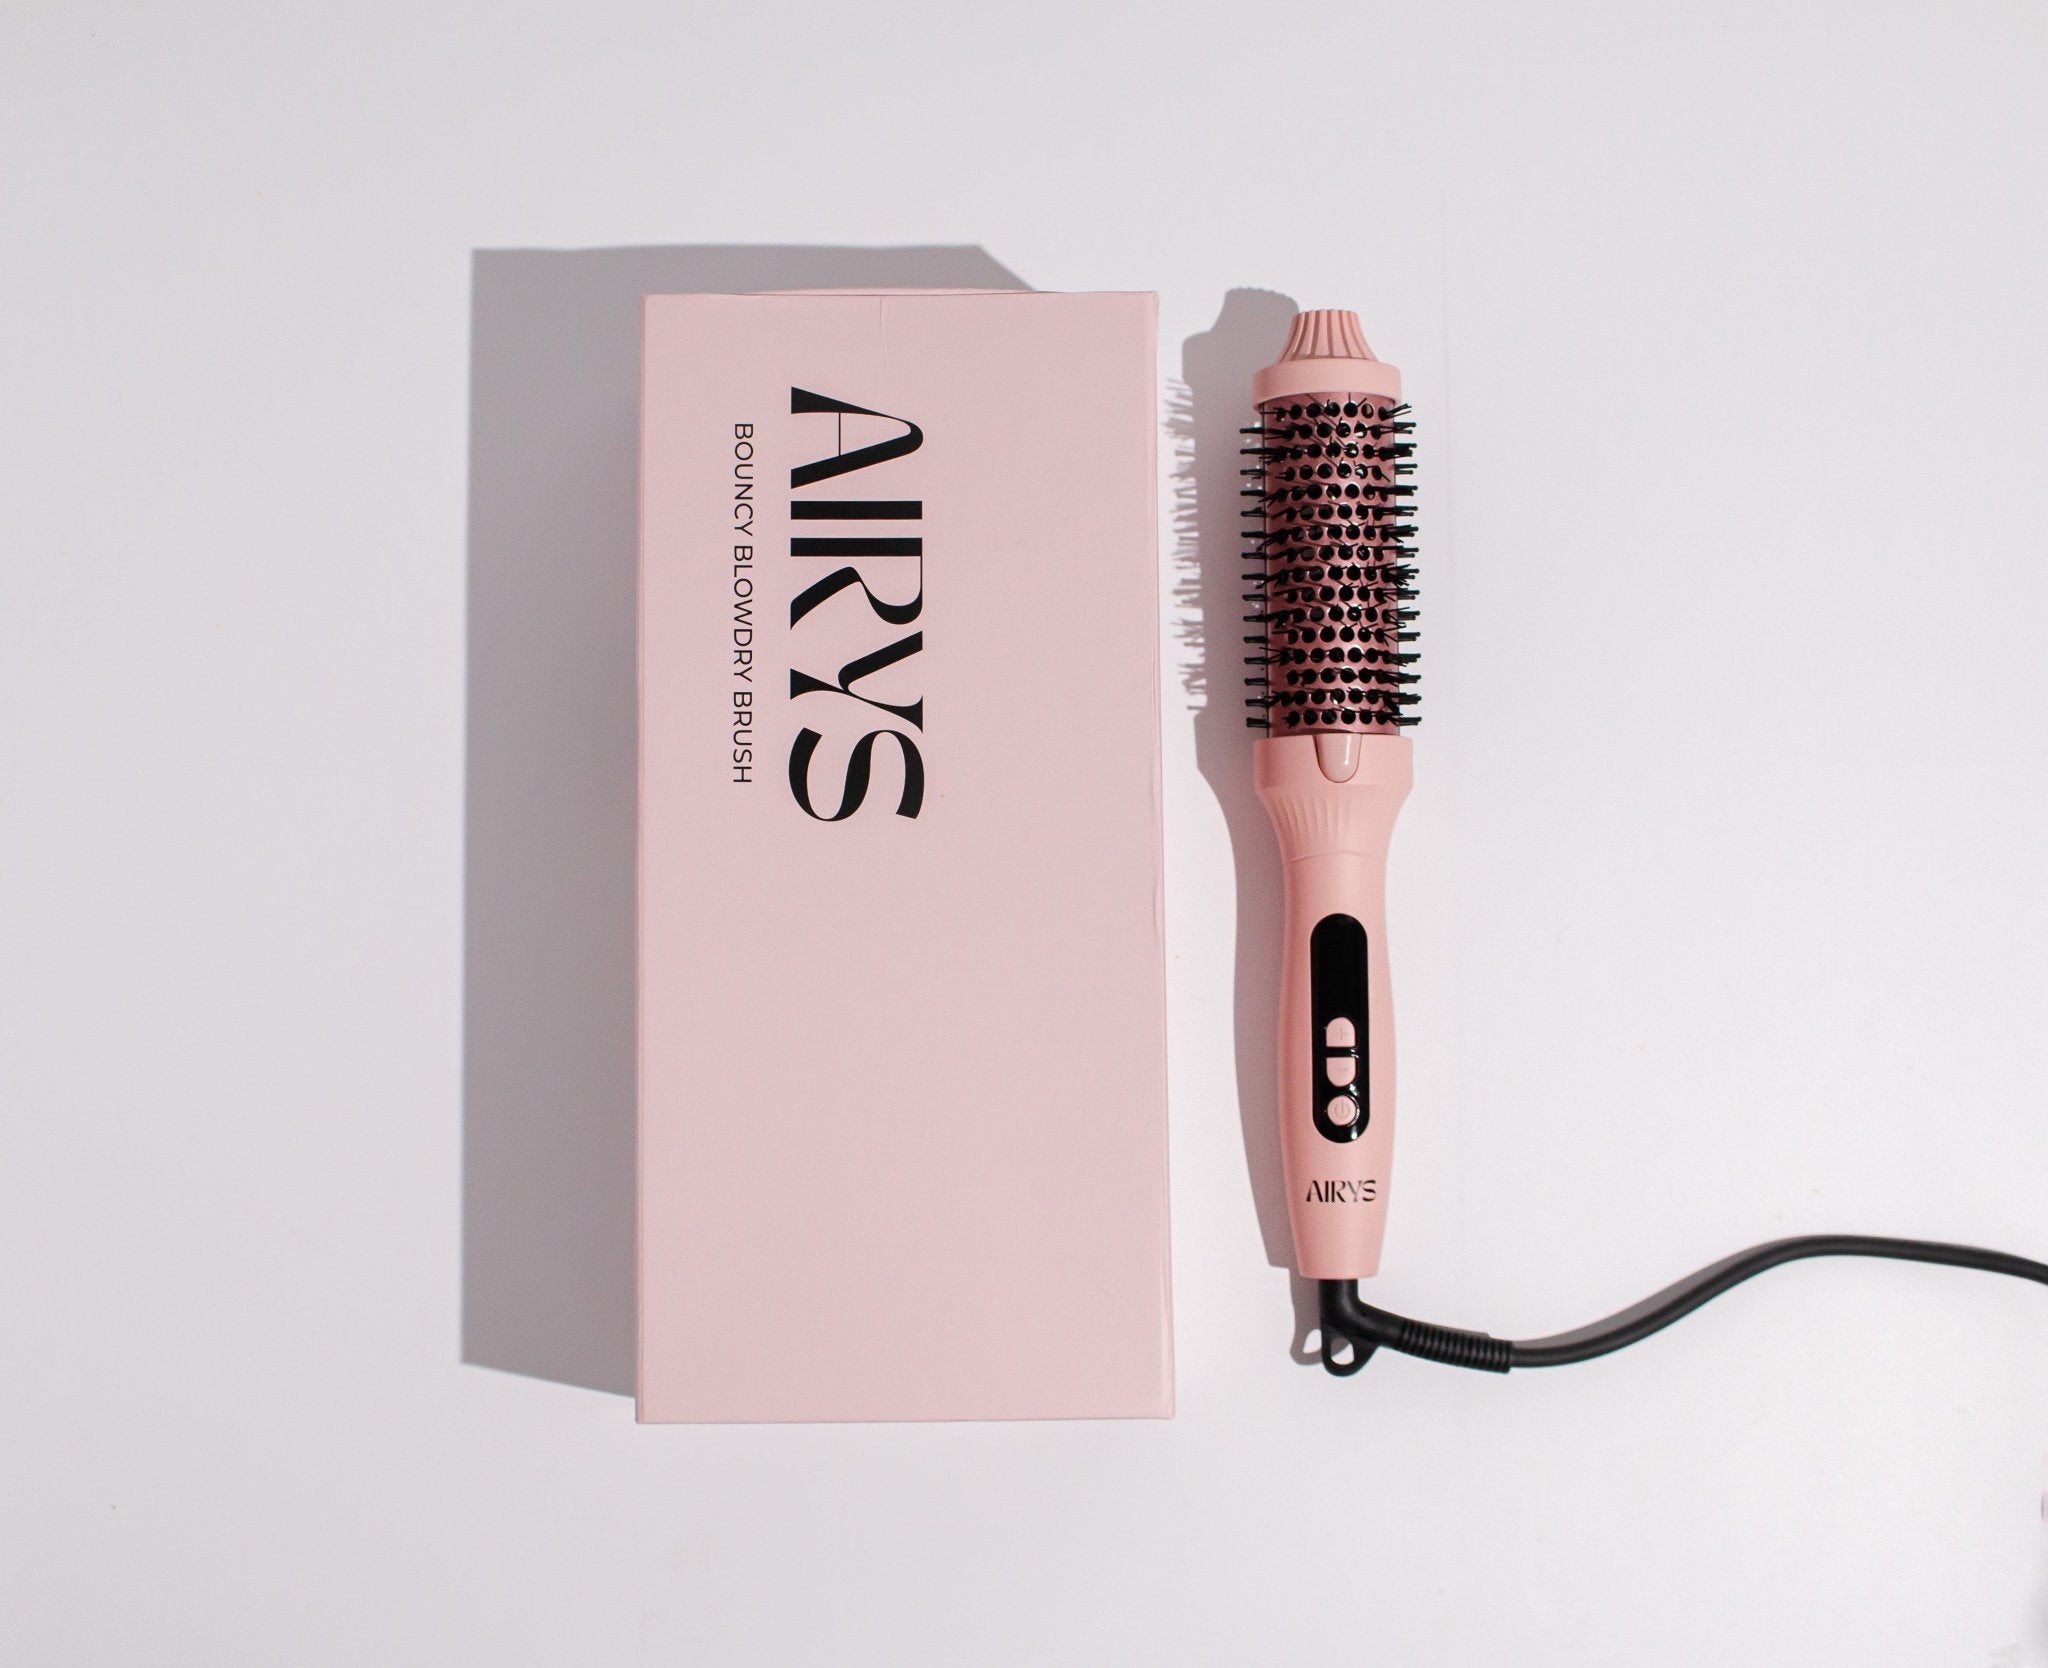 Airys Bouncy Blowdry Brush - Airys Hair - Wave Babe - Airys Hair - 5 in 1 hair styler - 5 in 1 styler - wavy talk - hair curler - curling tong - thermal brush - bouncy blowdry brush - mermaid waver - beach wave - interchangeable head - hair styling attachments - curling wand - blowout brush - amika brush - air wrap - heated brush 